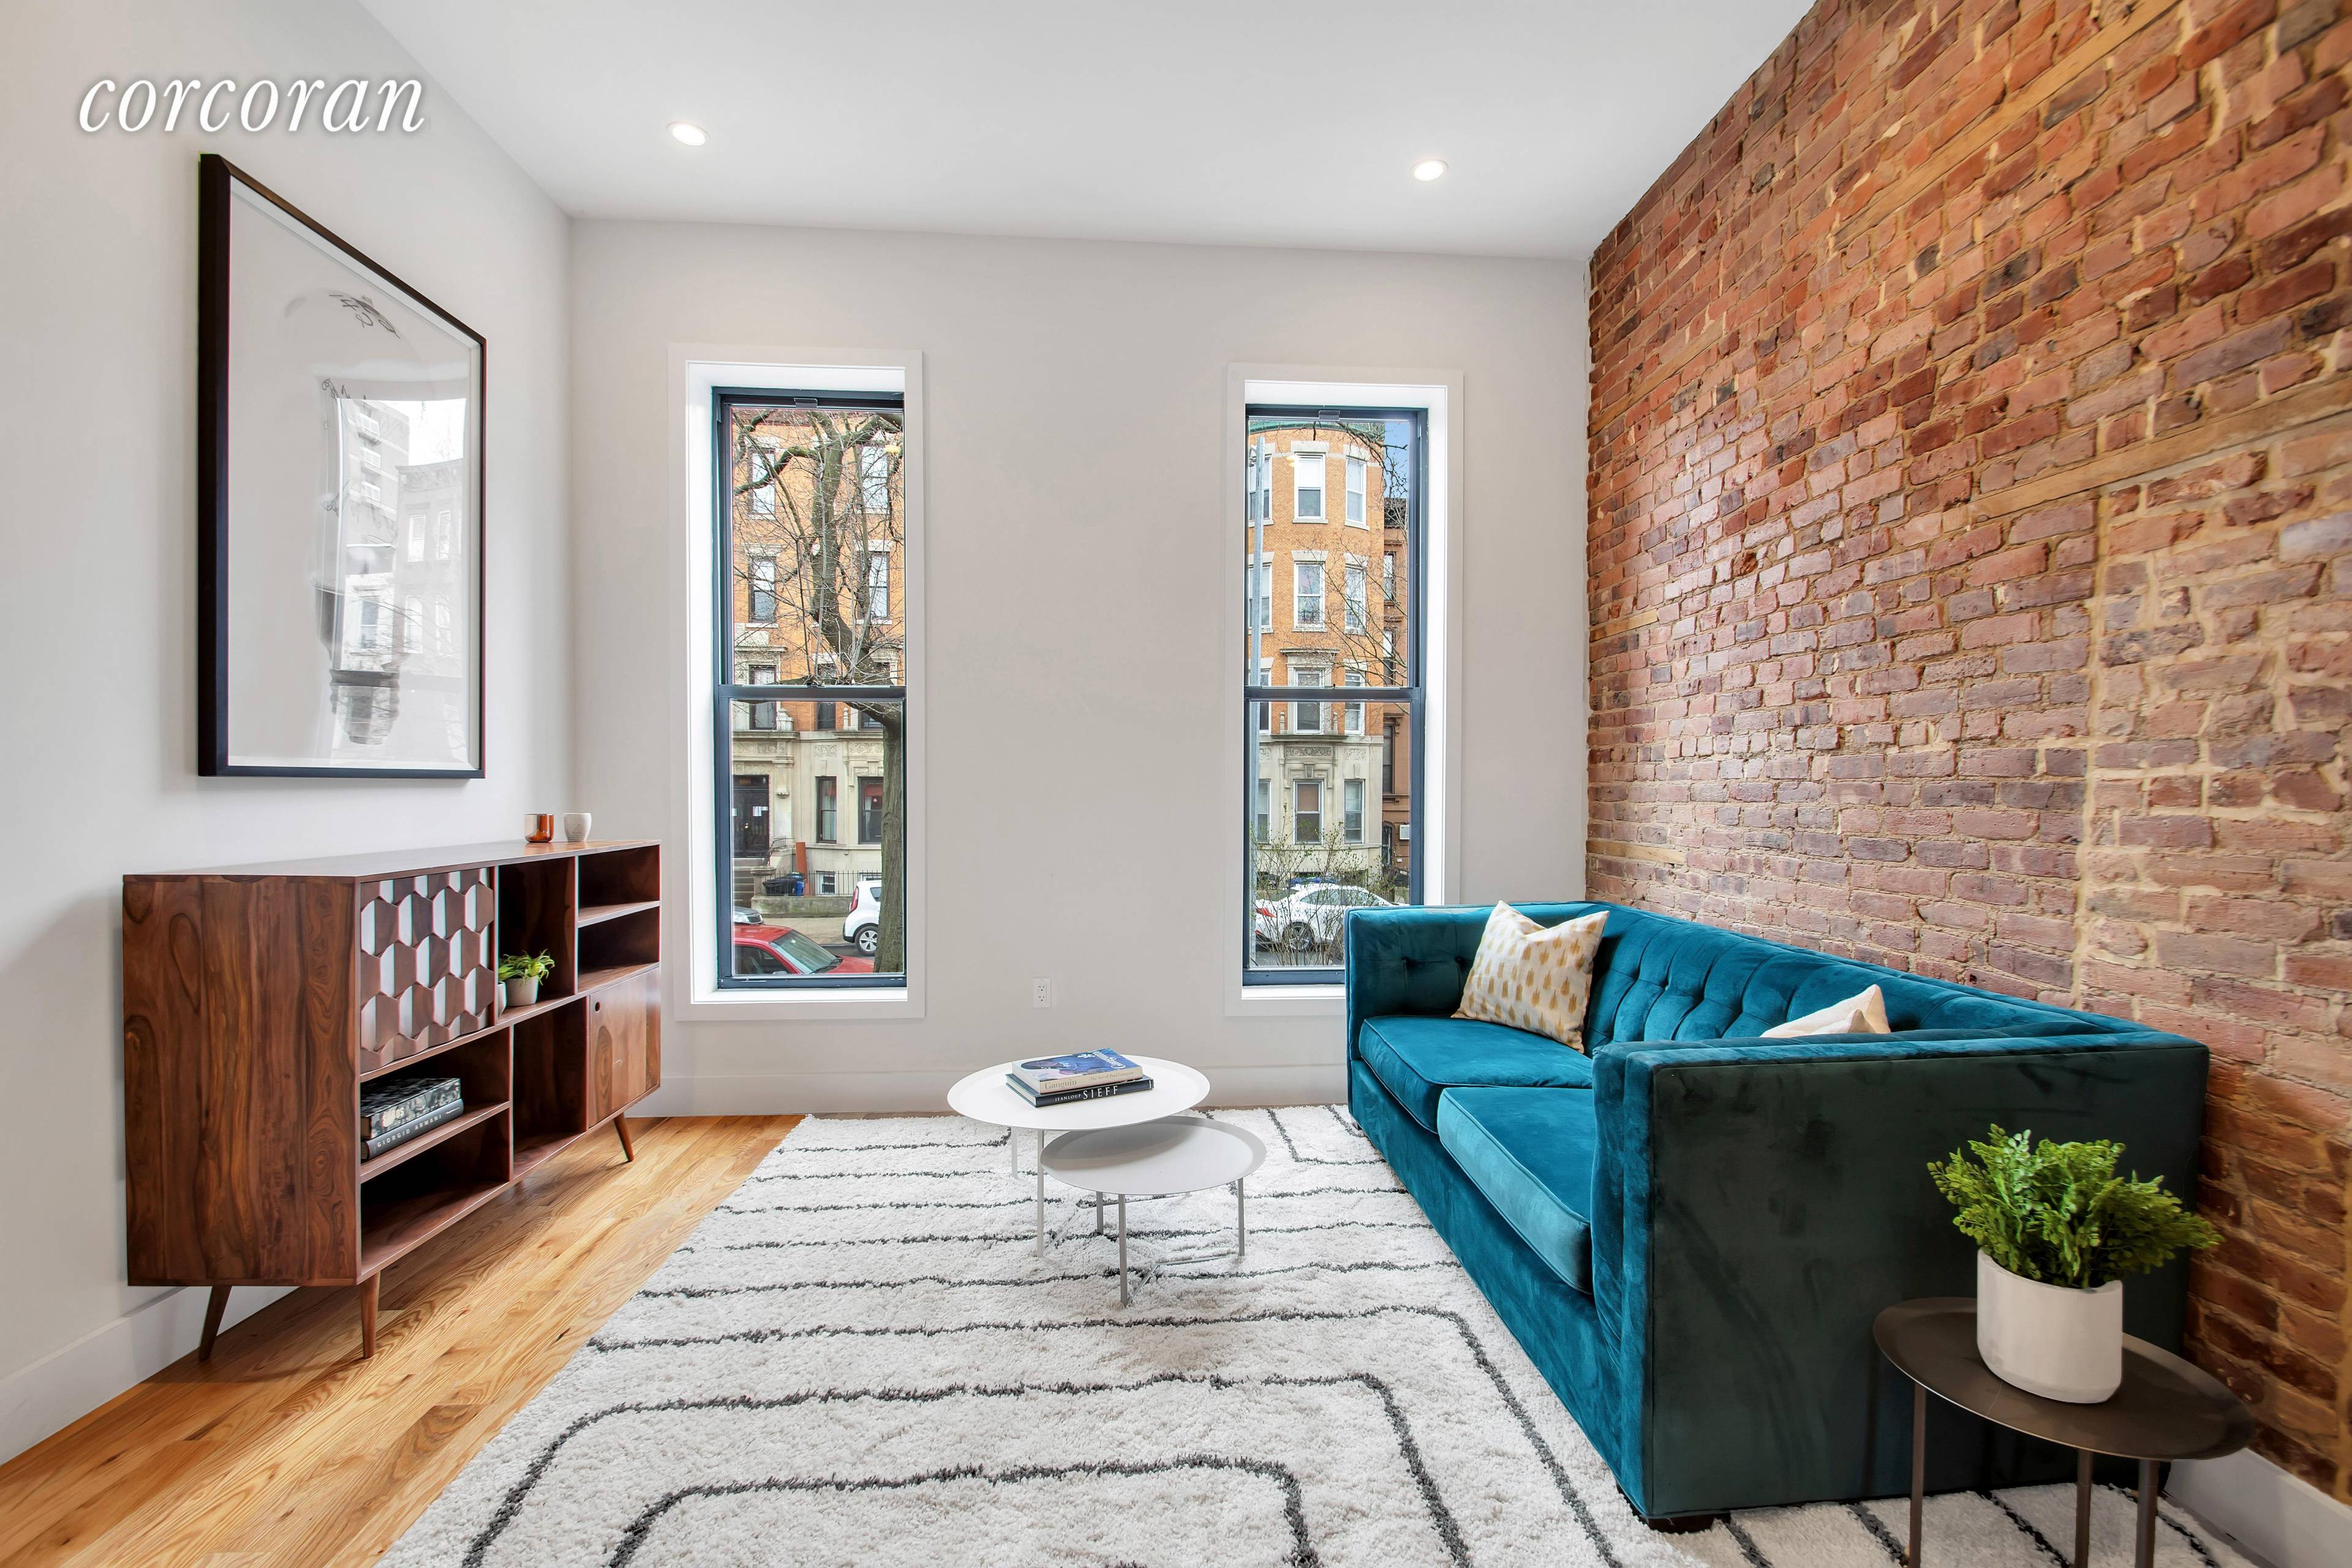 Asking only 505 foot 6 cap rate with over 155k in annual net income on this 2019 renovated 4 unit multifamily investment property in Western Crown Heights !